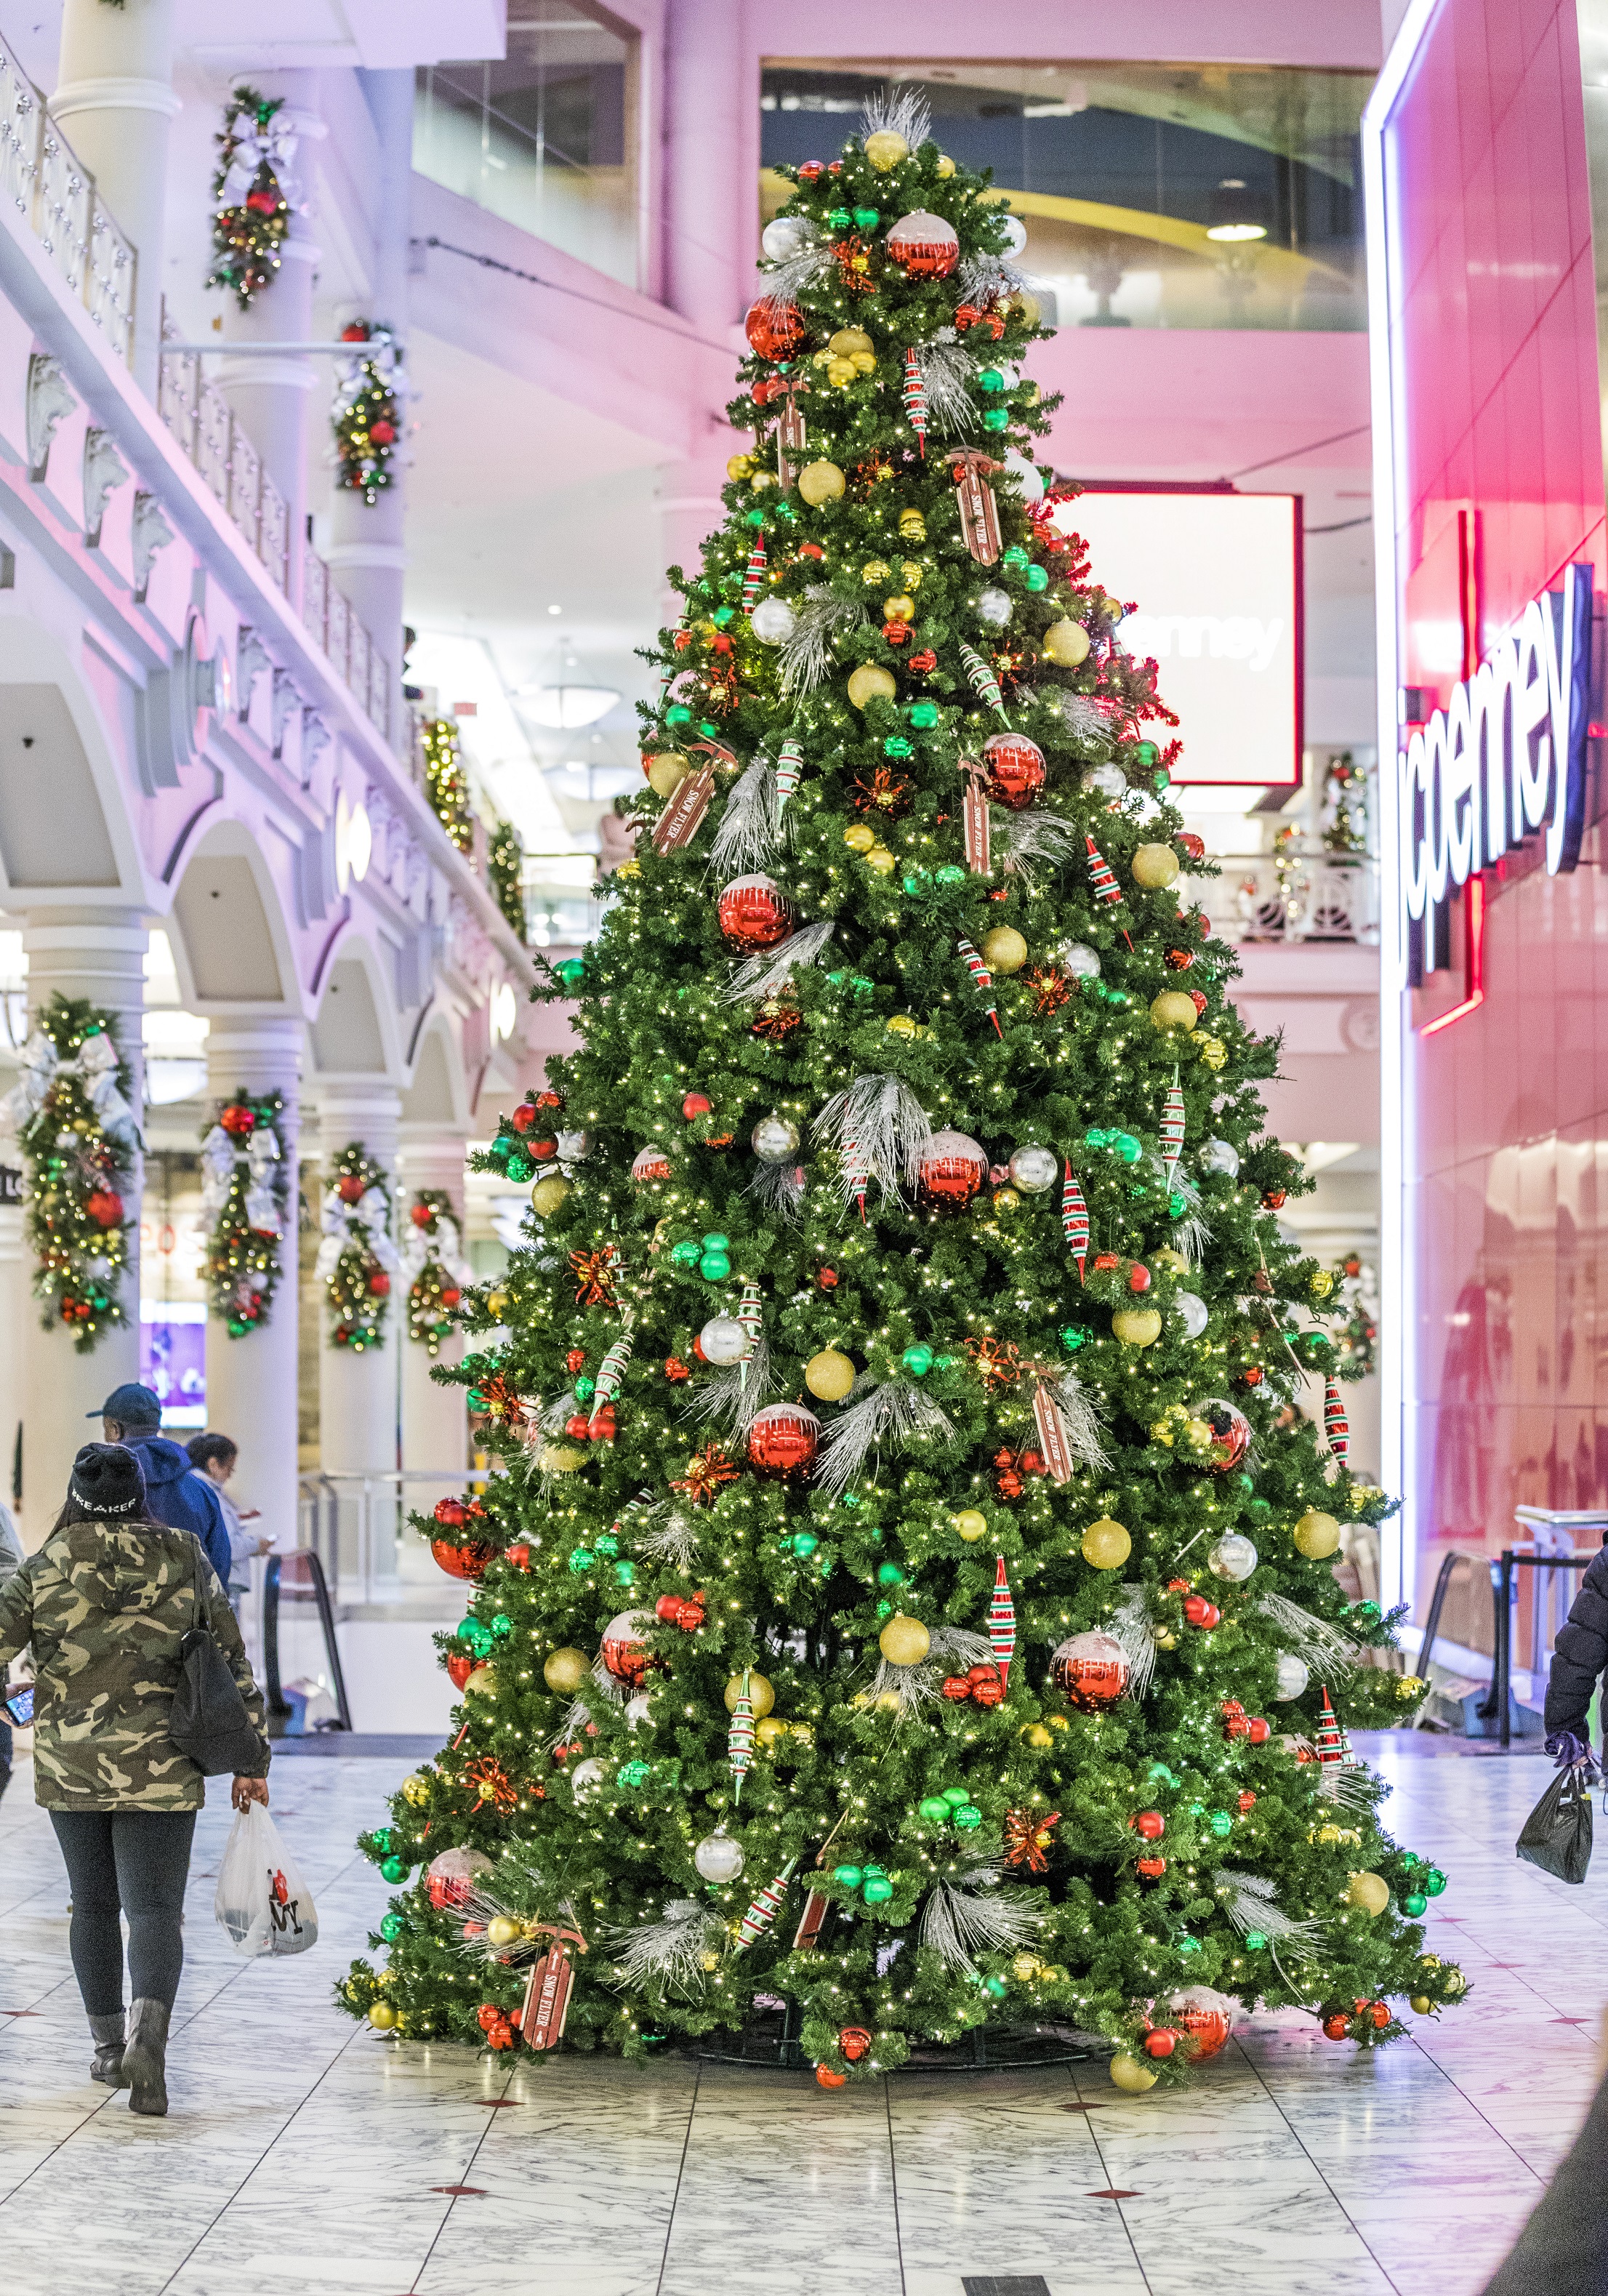 Holiday cheer resonates through the great hall of this shopping center sparking joy and excitement for visitors big and small.